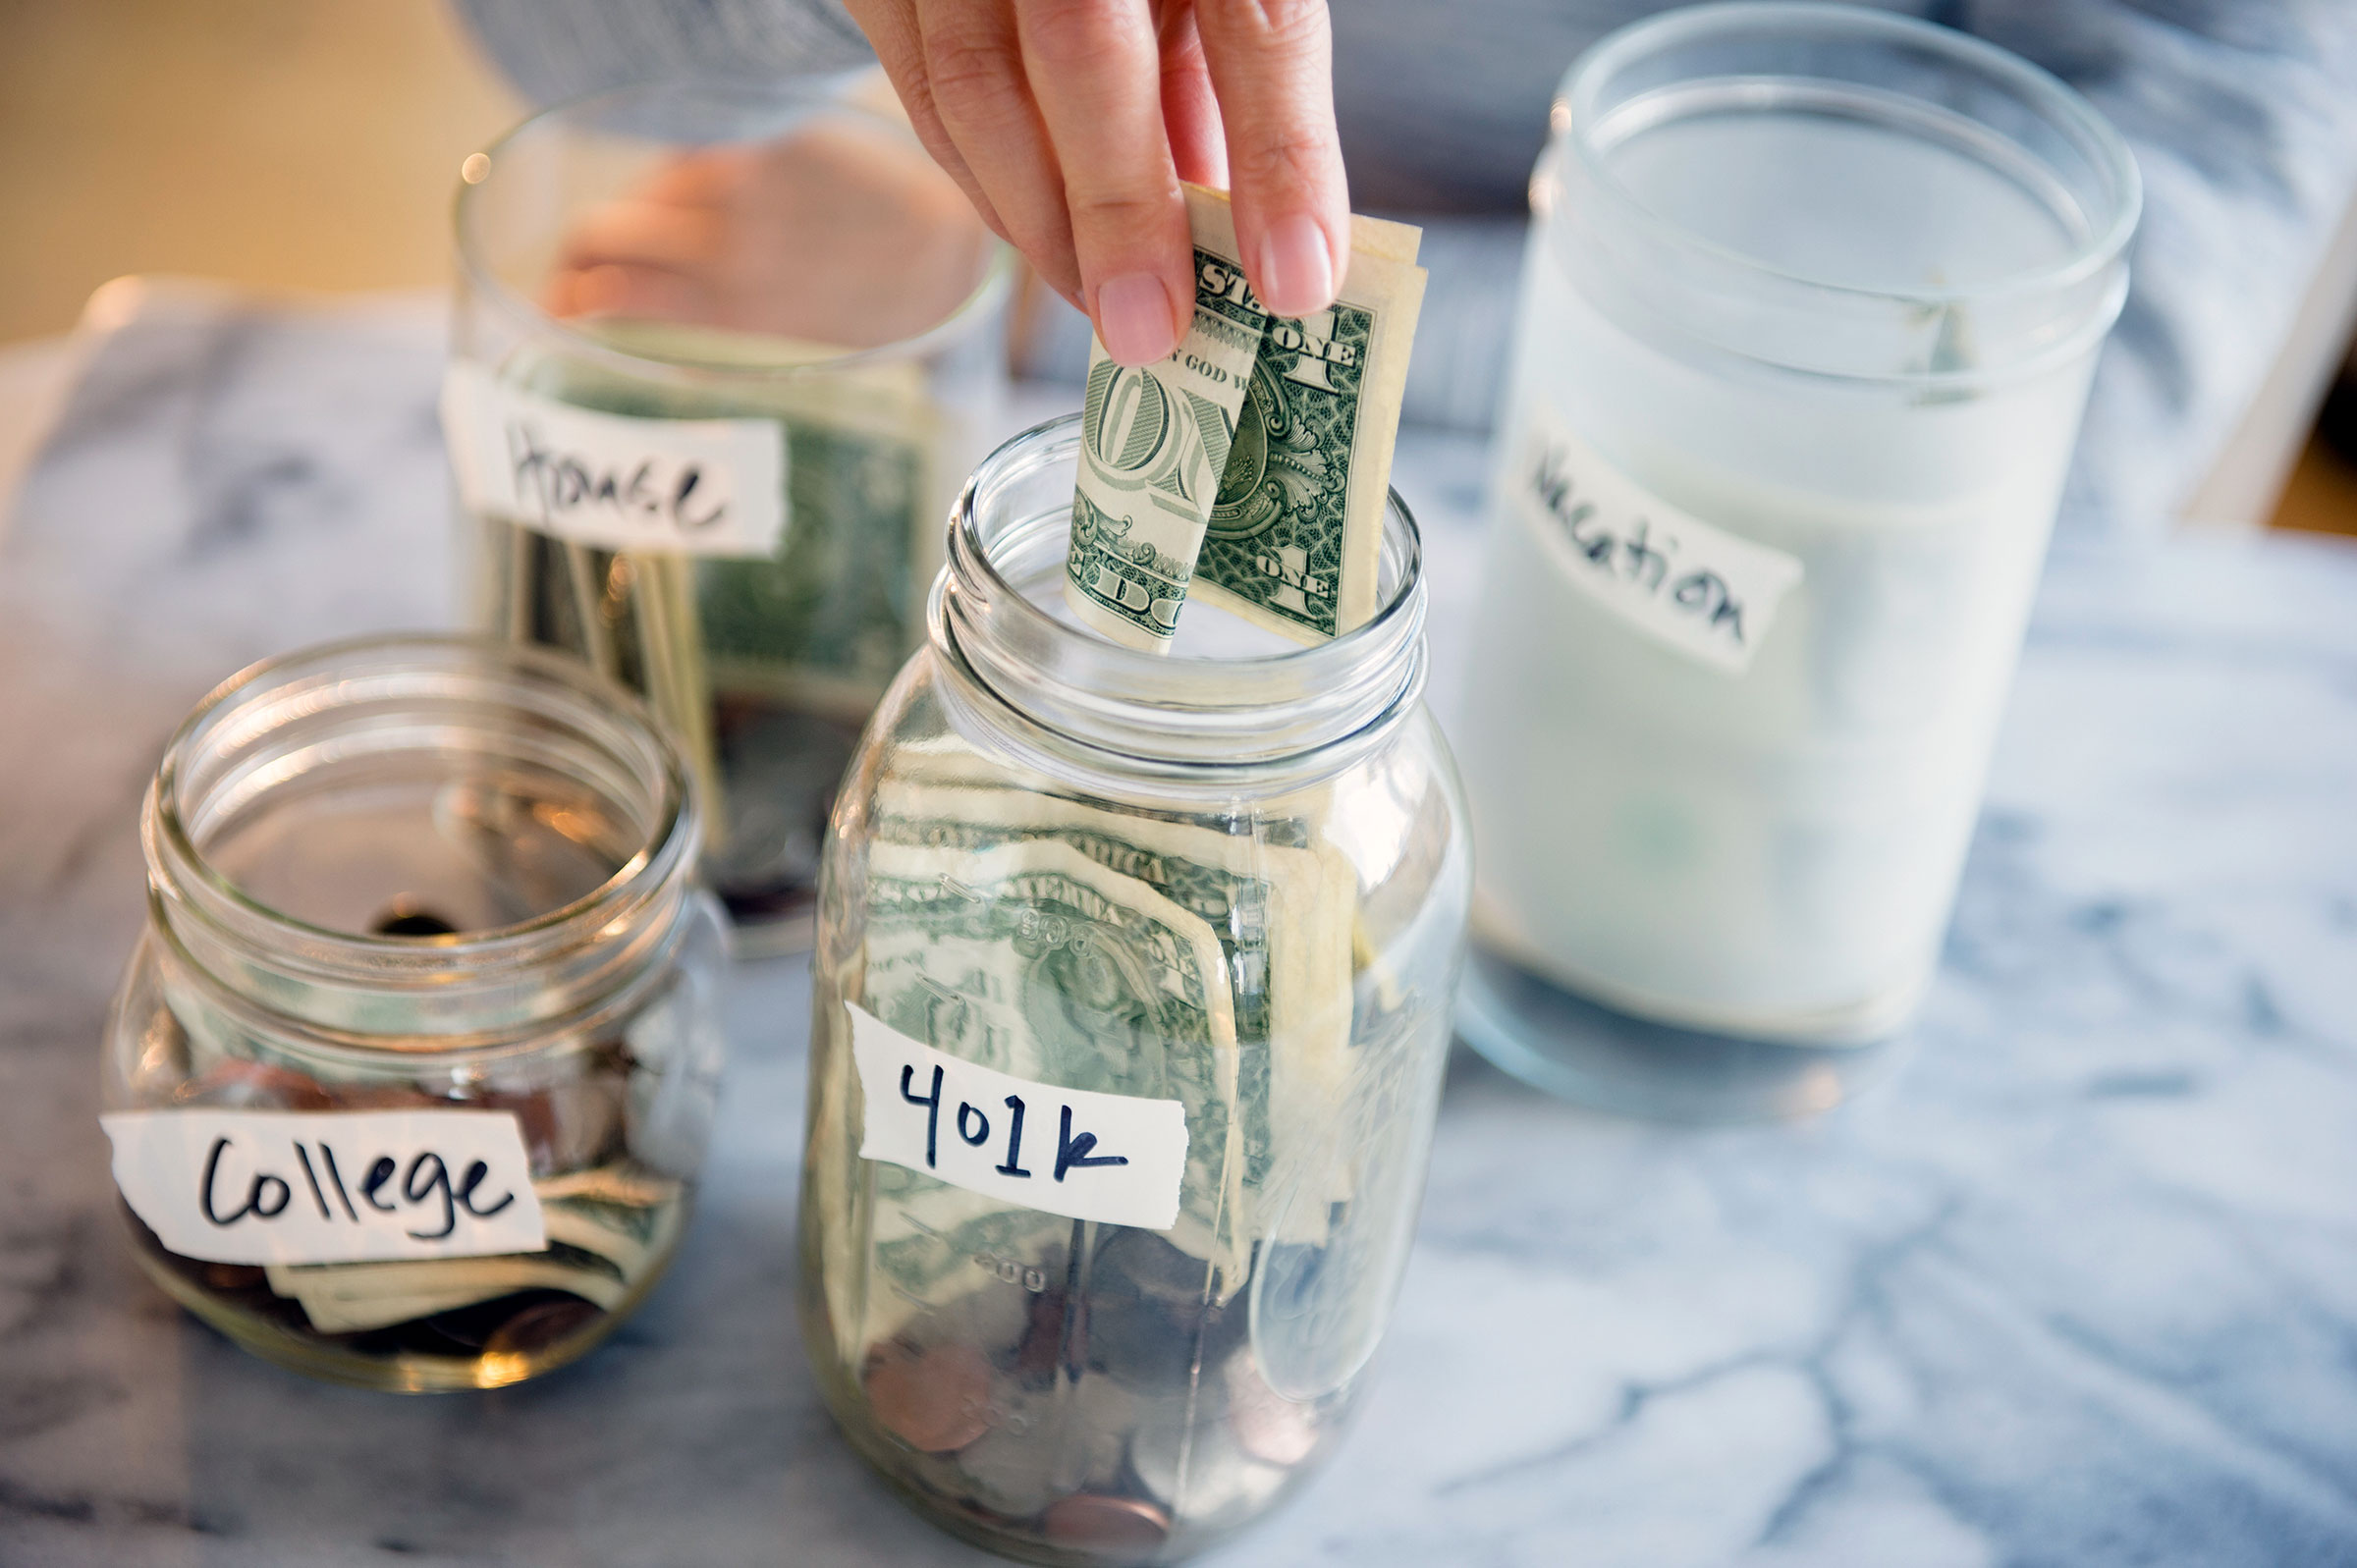 Experts recommend prioritizing necessities and paying down debt when prices are high. (Jamie Grill—Tetra Images/Getty Images)